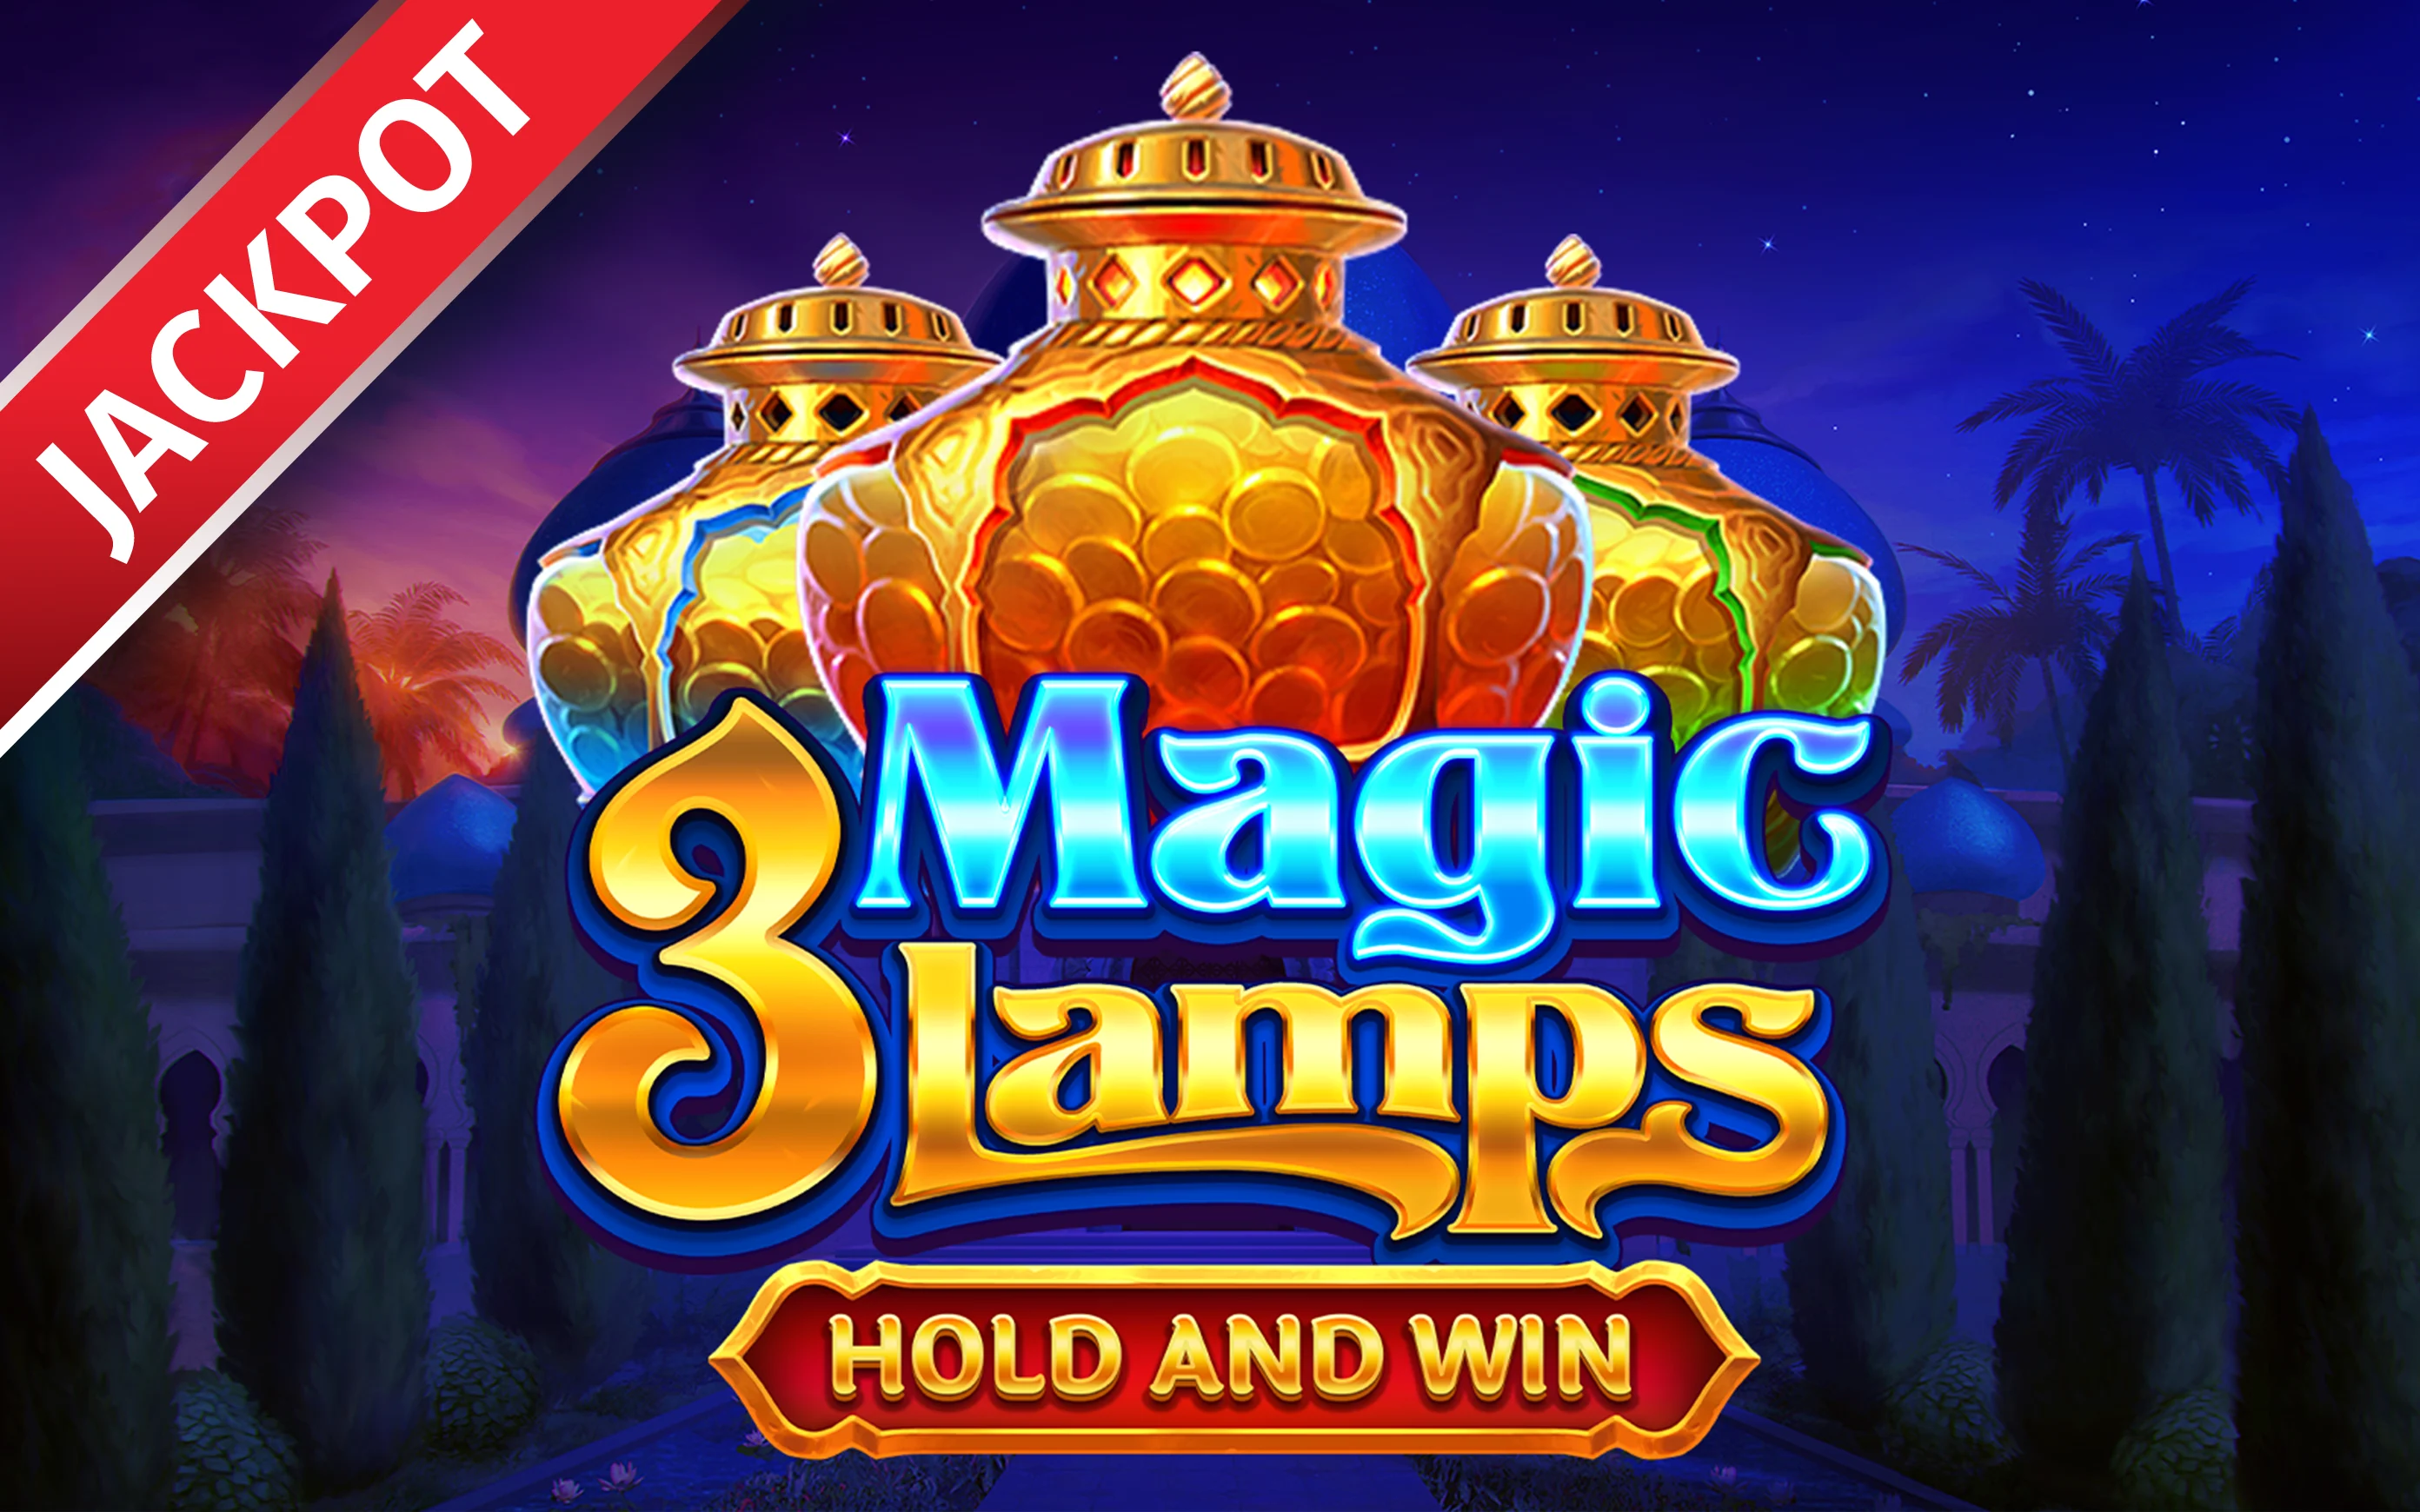 Spil 3 Magic Lamps: Hold and Win på Starcasino.be online kasino
